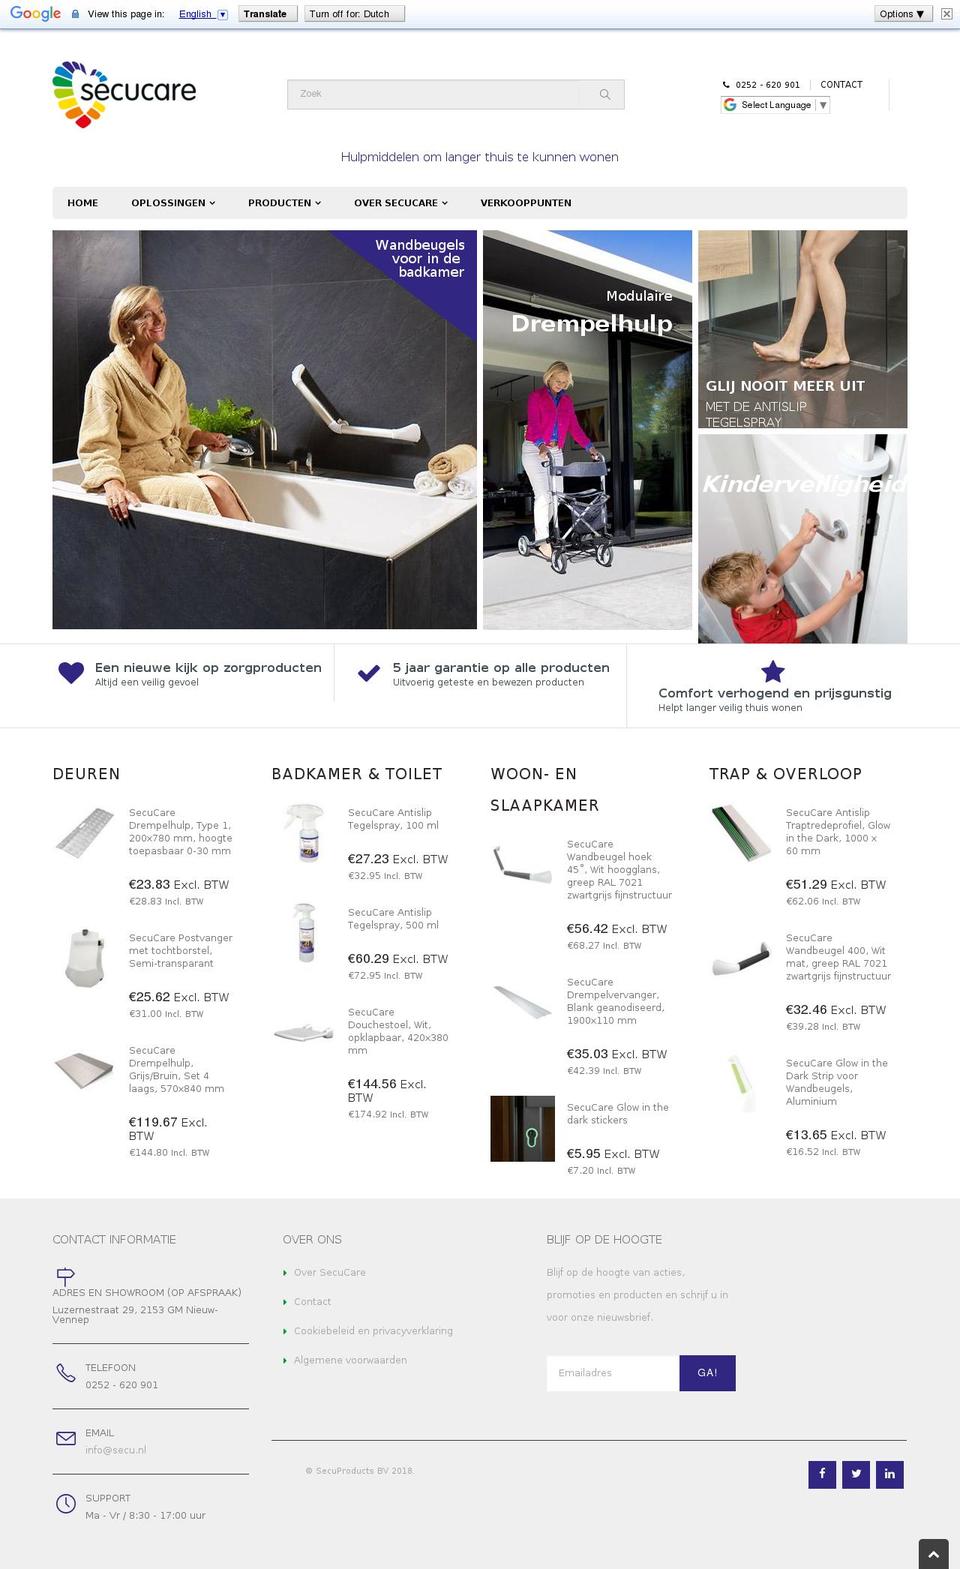 MAX Shopify theme site example secucare.nl